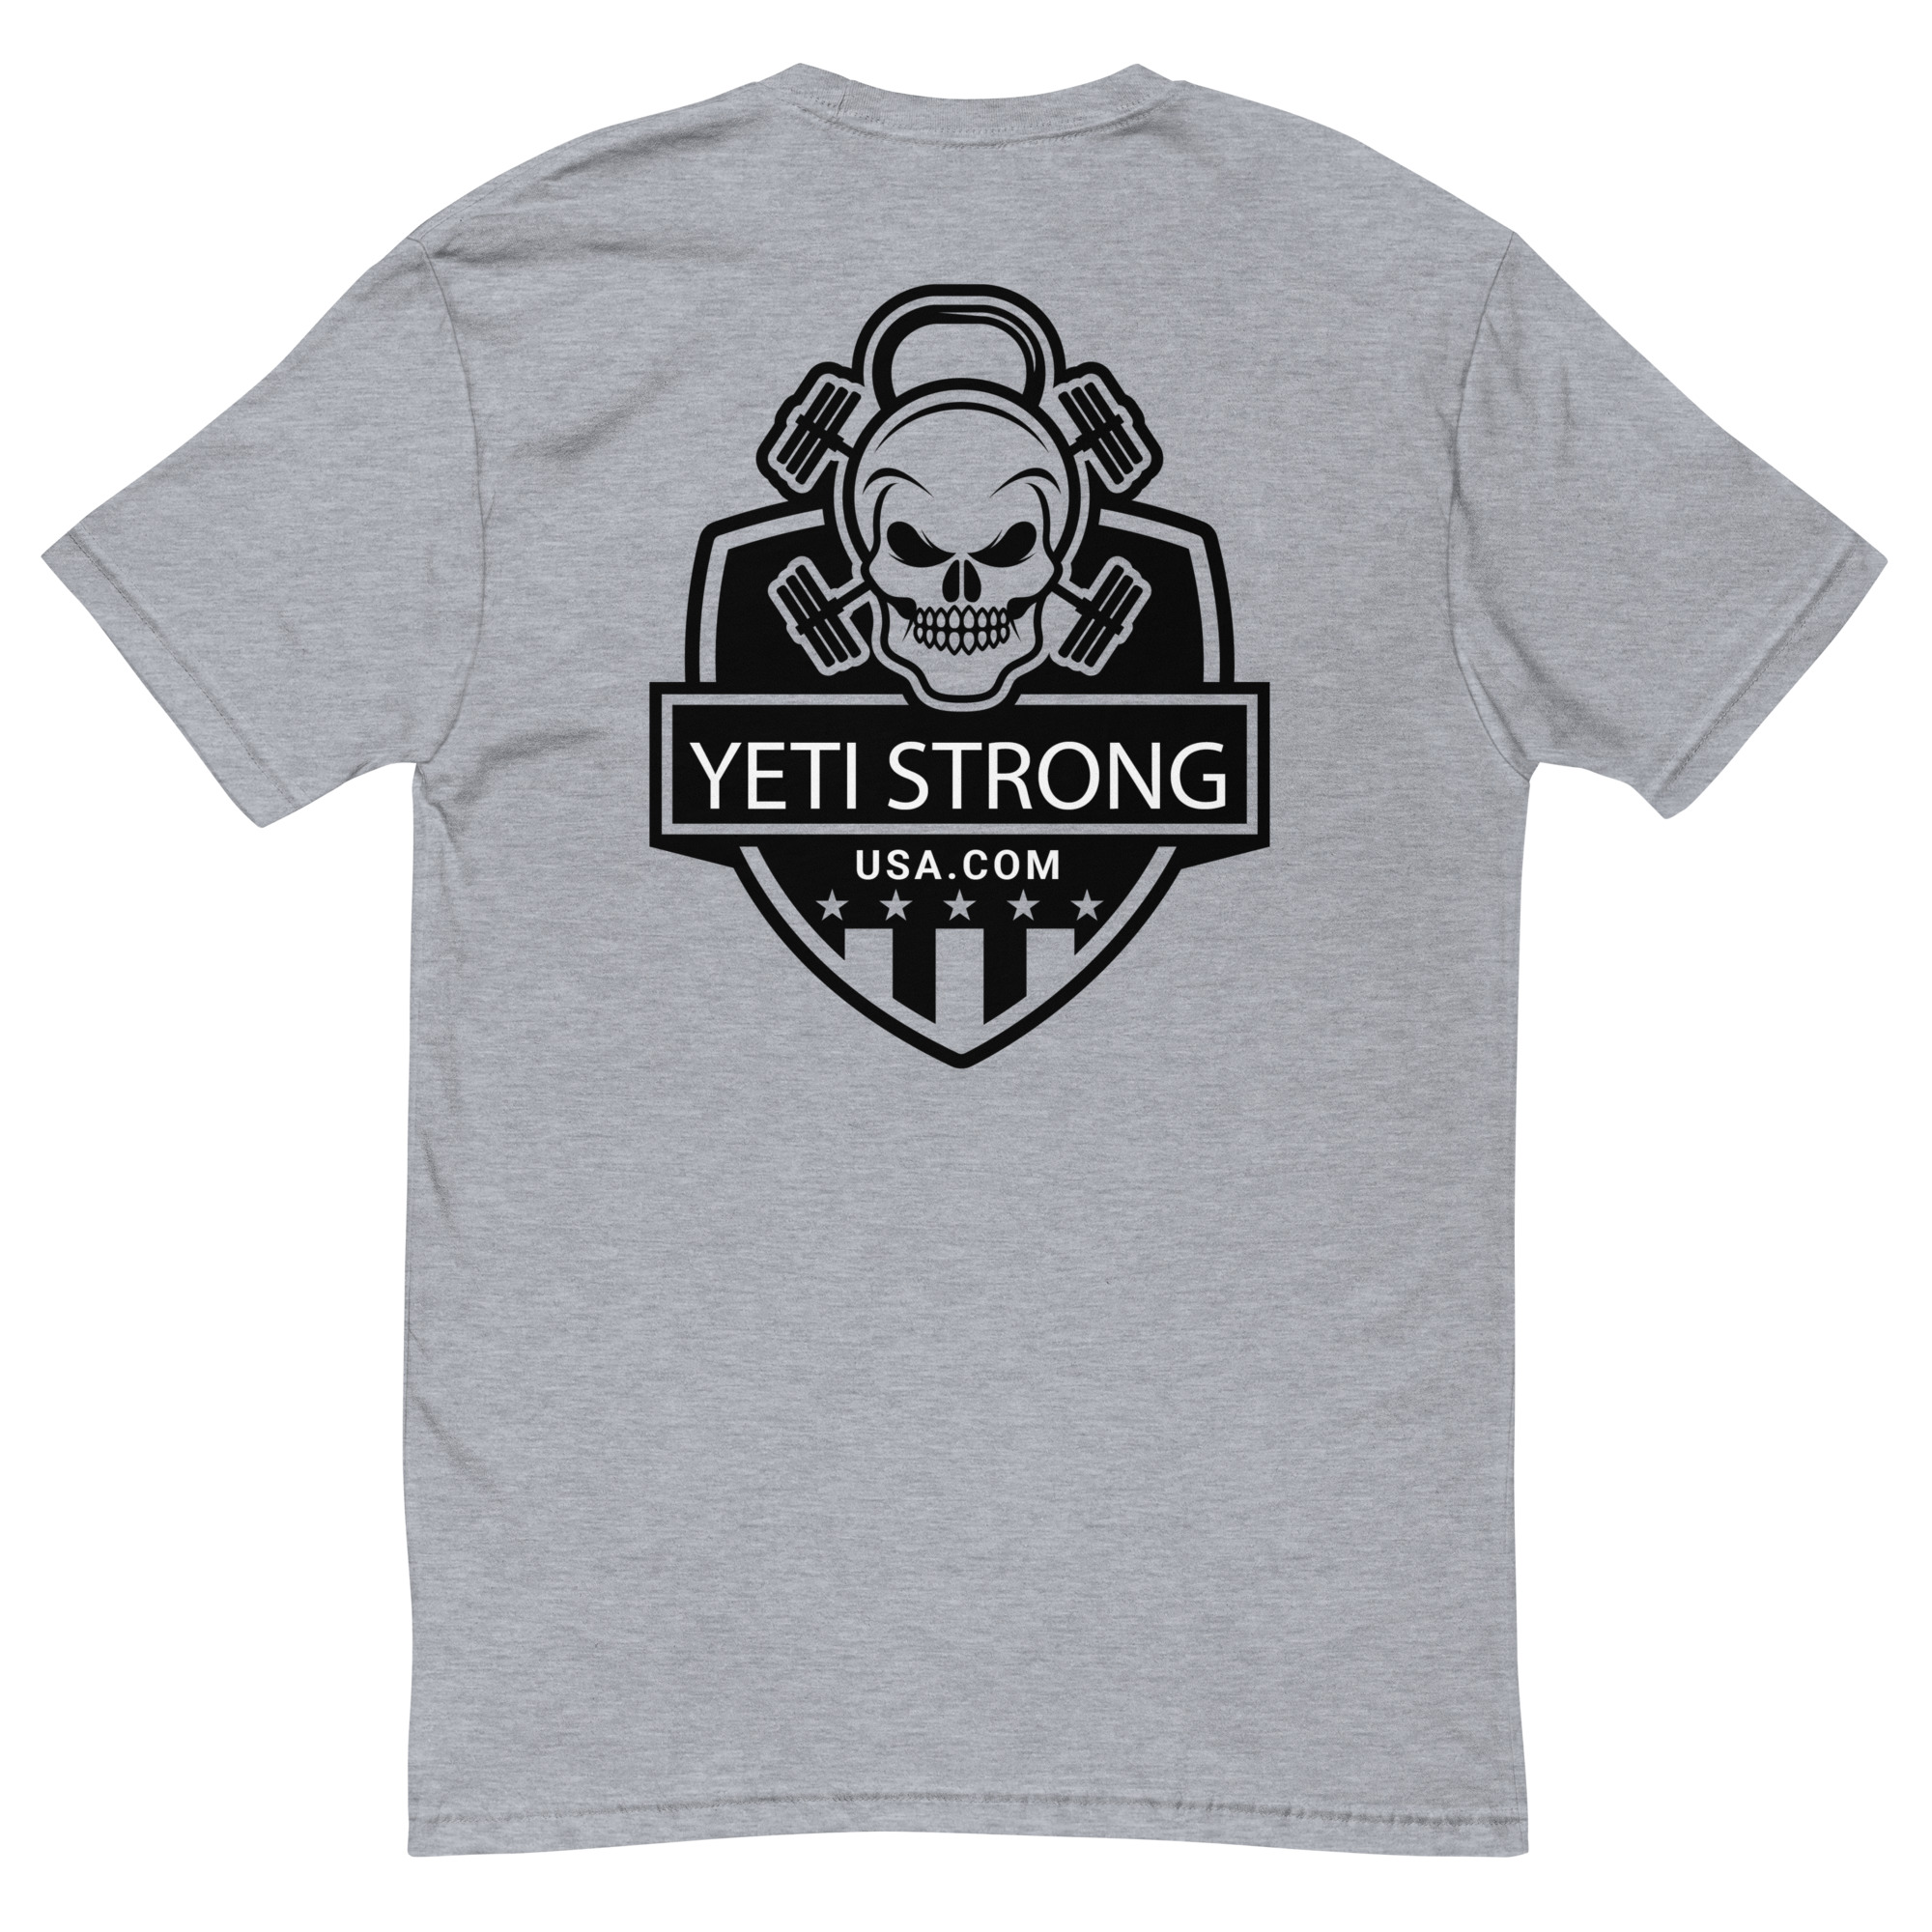 https://yetistrongusa.com/wp-content/uploads/2023/03/mens-fitted-t-shirt-heather-grey-back-6408d7912b63a.jpg